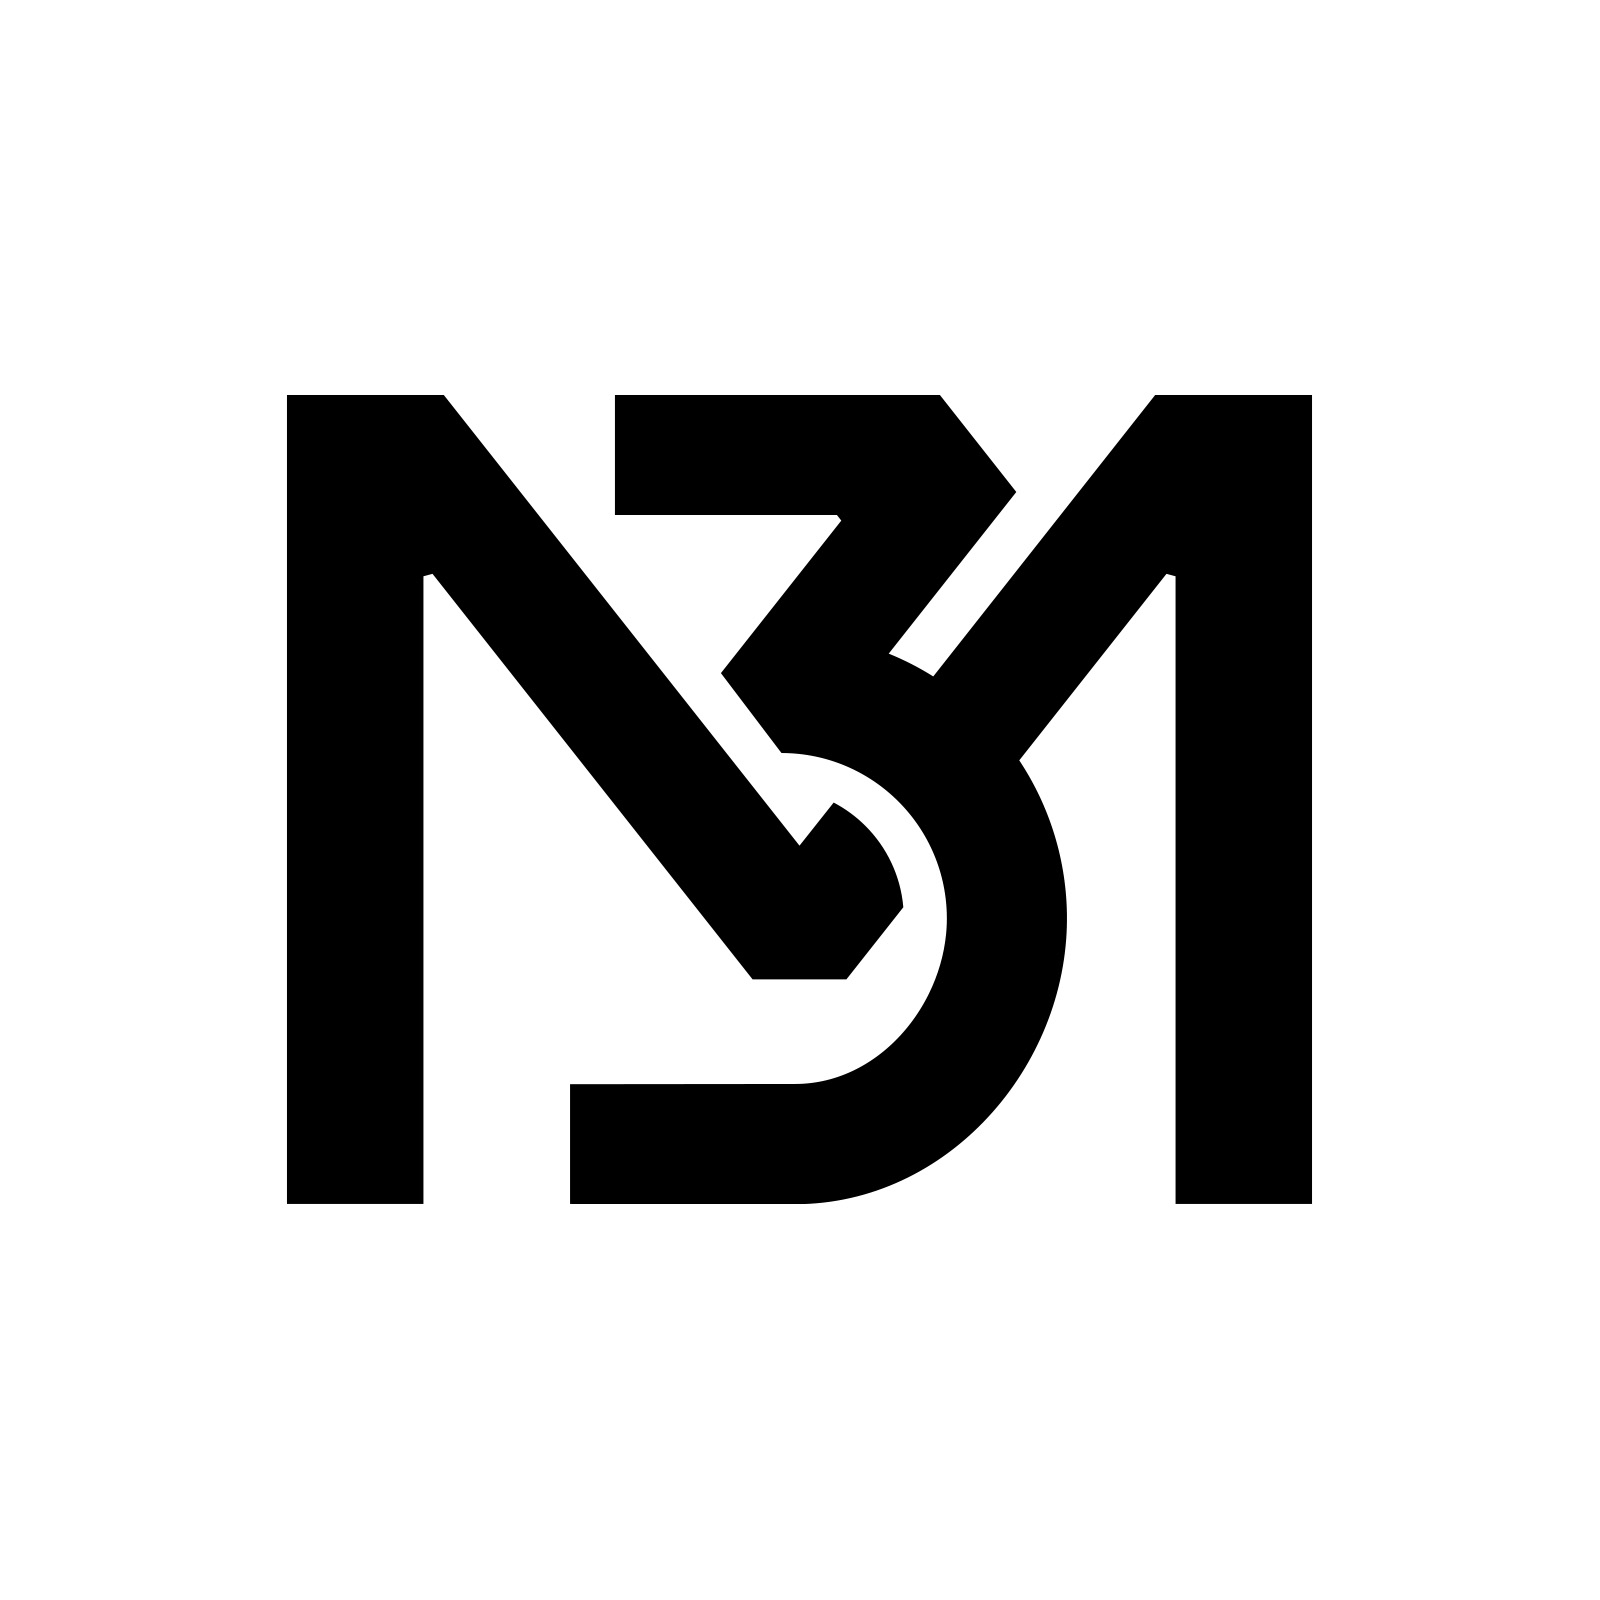 M3 logo design by logo designer Stanislav+Regis for your inspiration and for the worlds largest logo competition